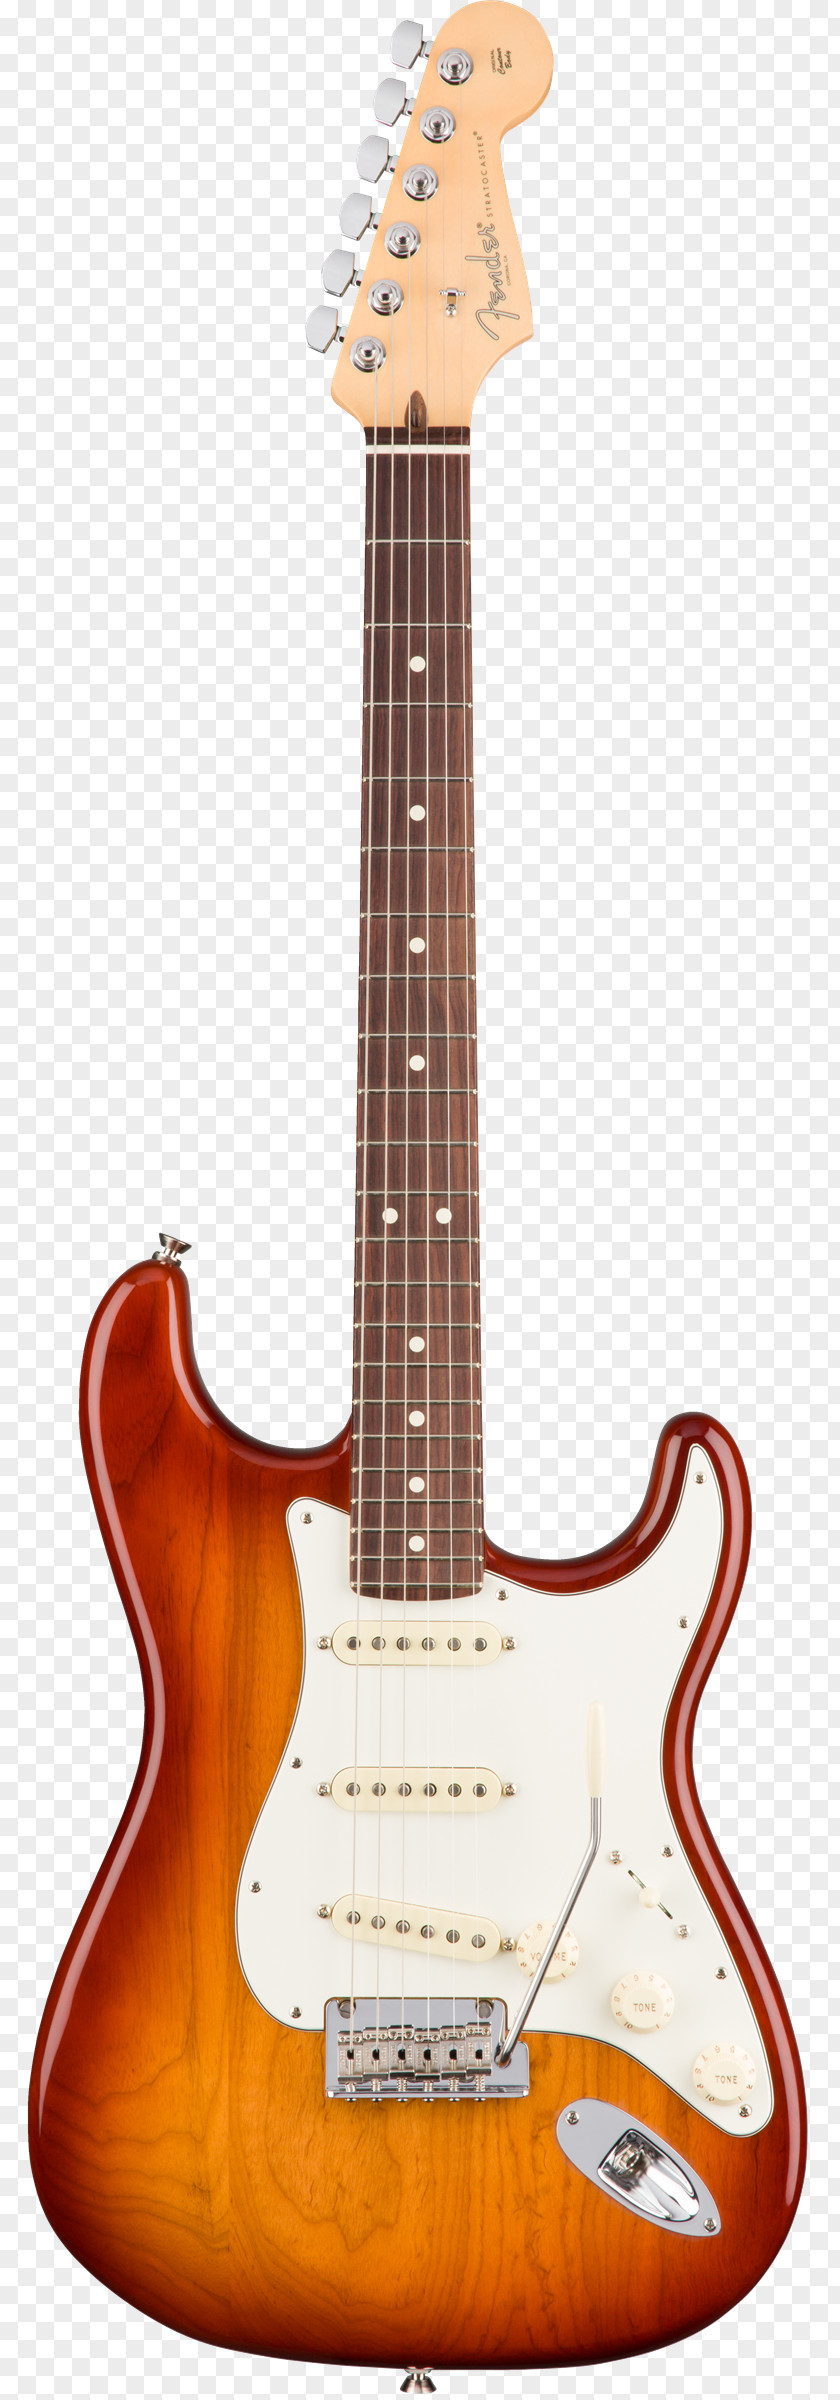 Electric Guitar Fender Stratocaster Musical Instruments Corporation Bullet American Deluxe Series PNG